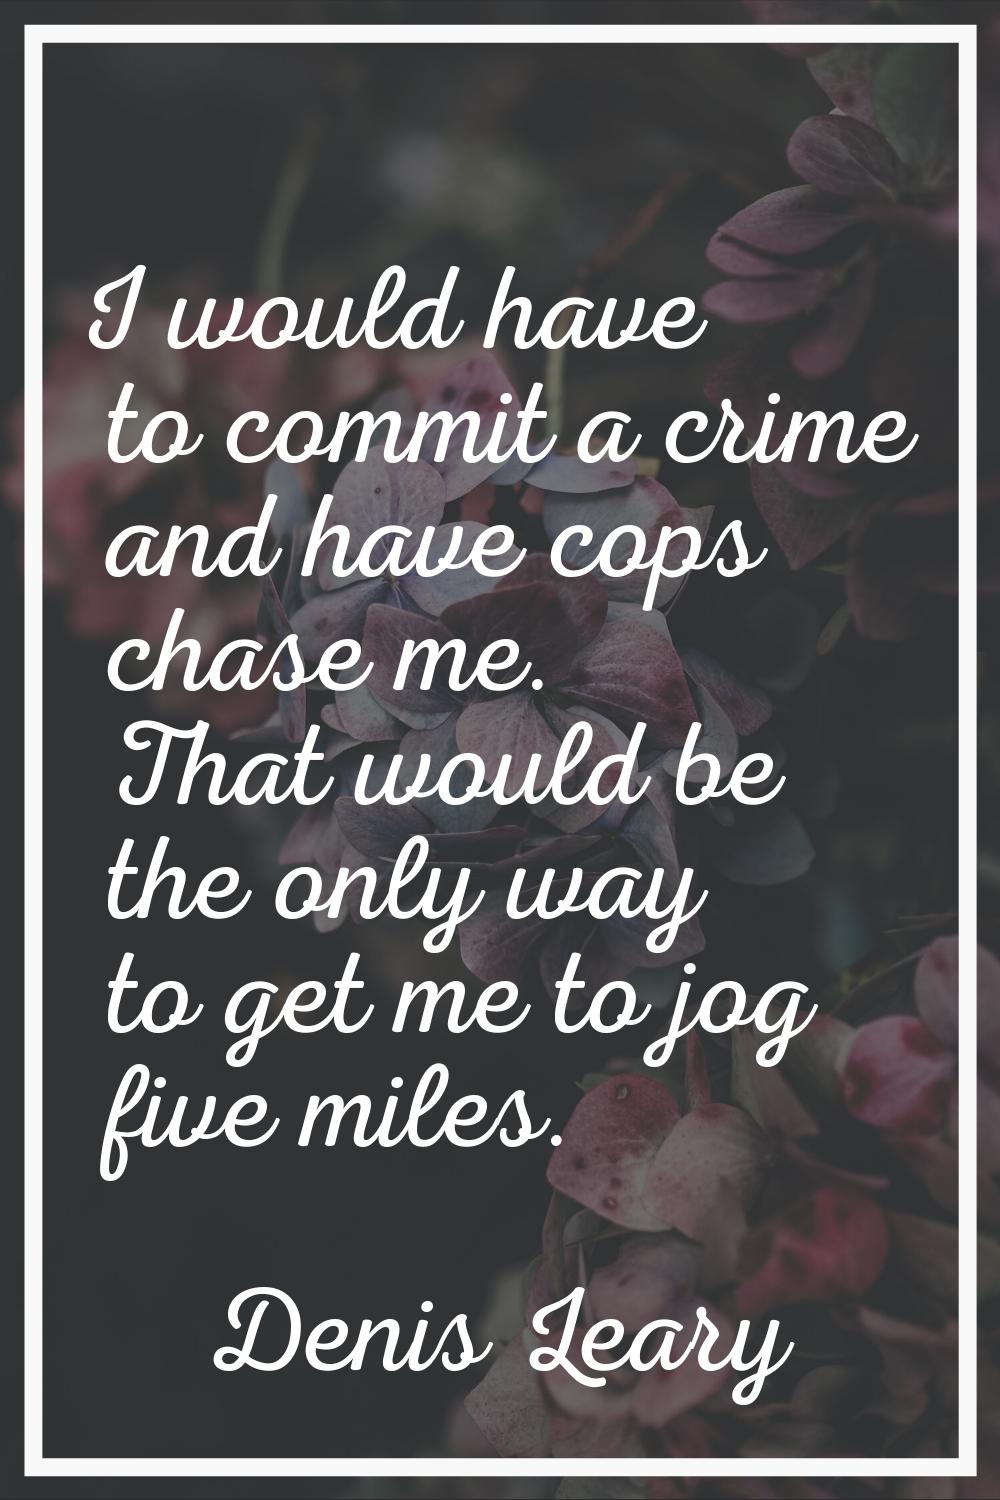 I would have to commit a crime and have cops chase me. That would be the only way to get me to jog 